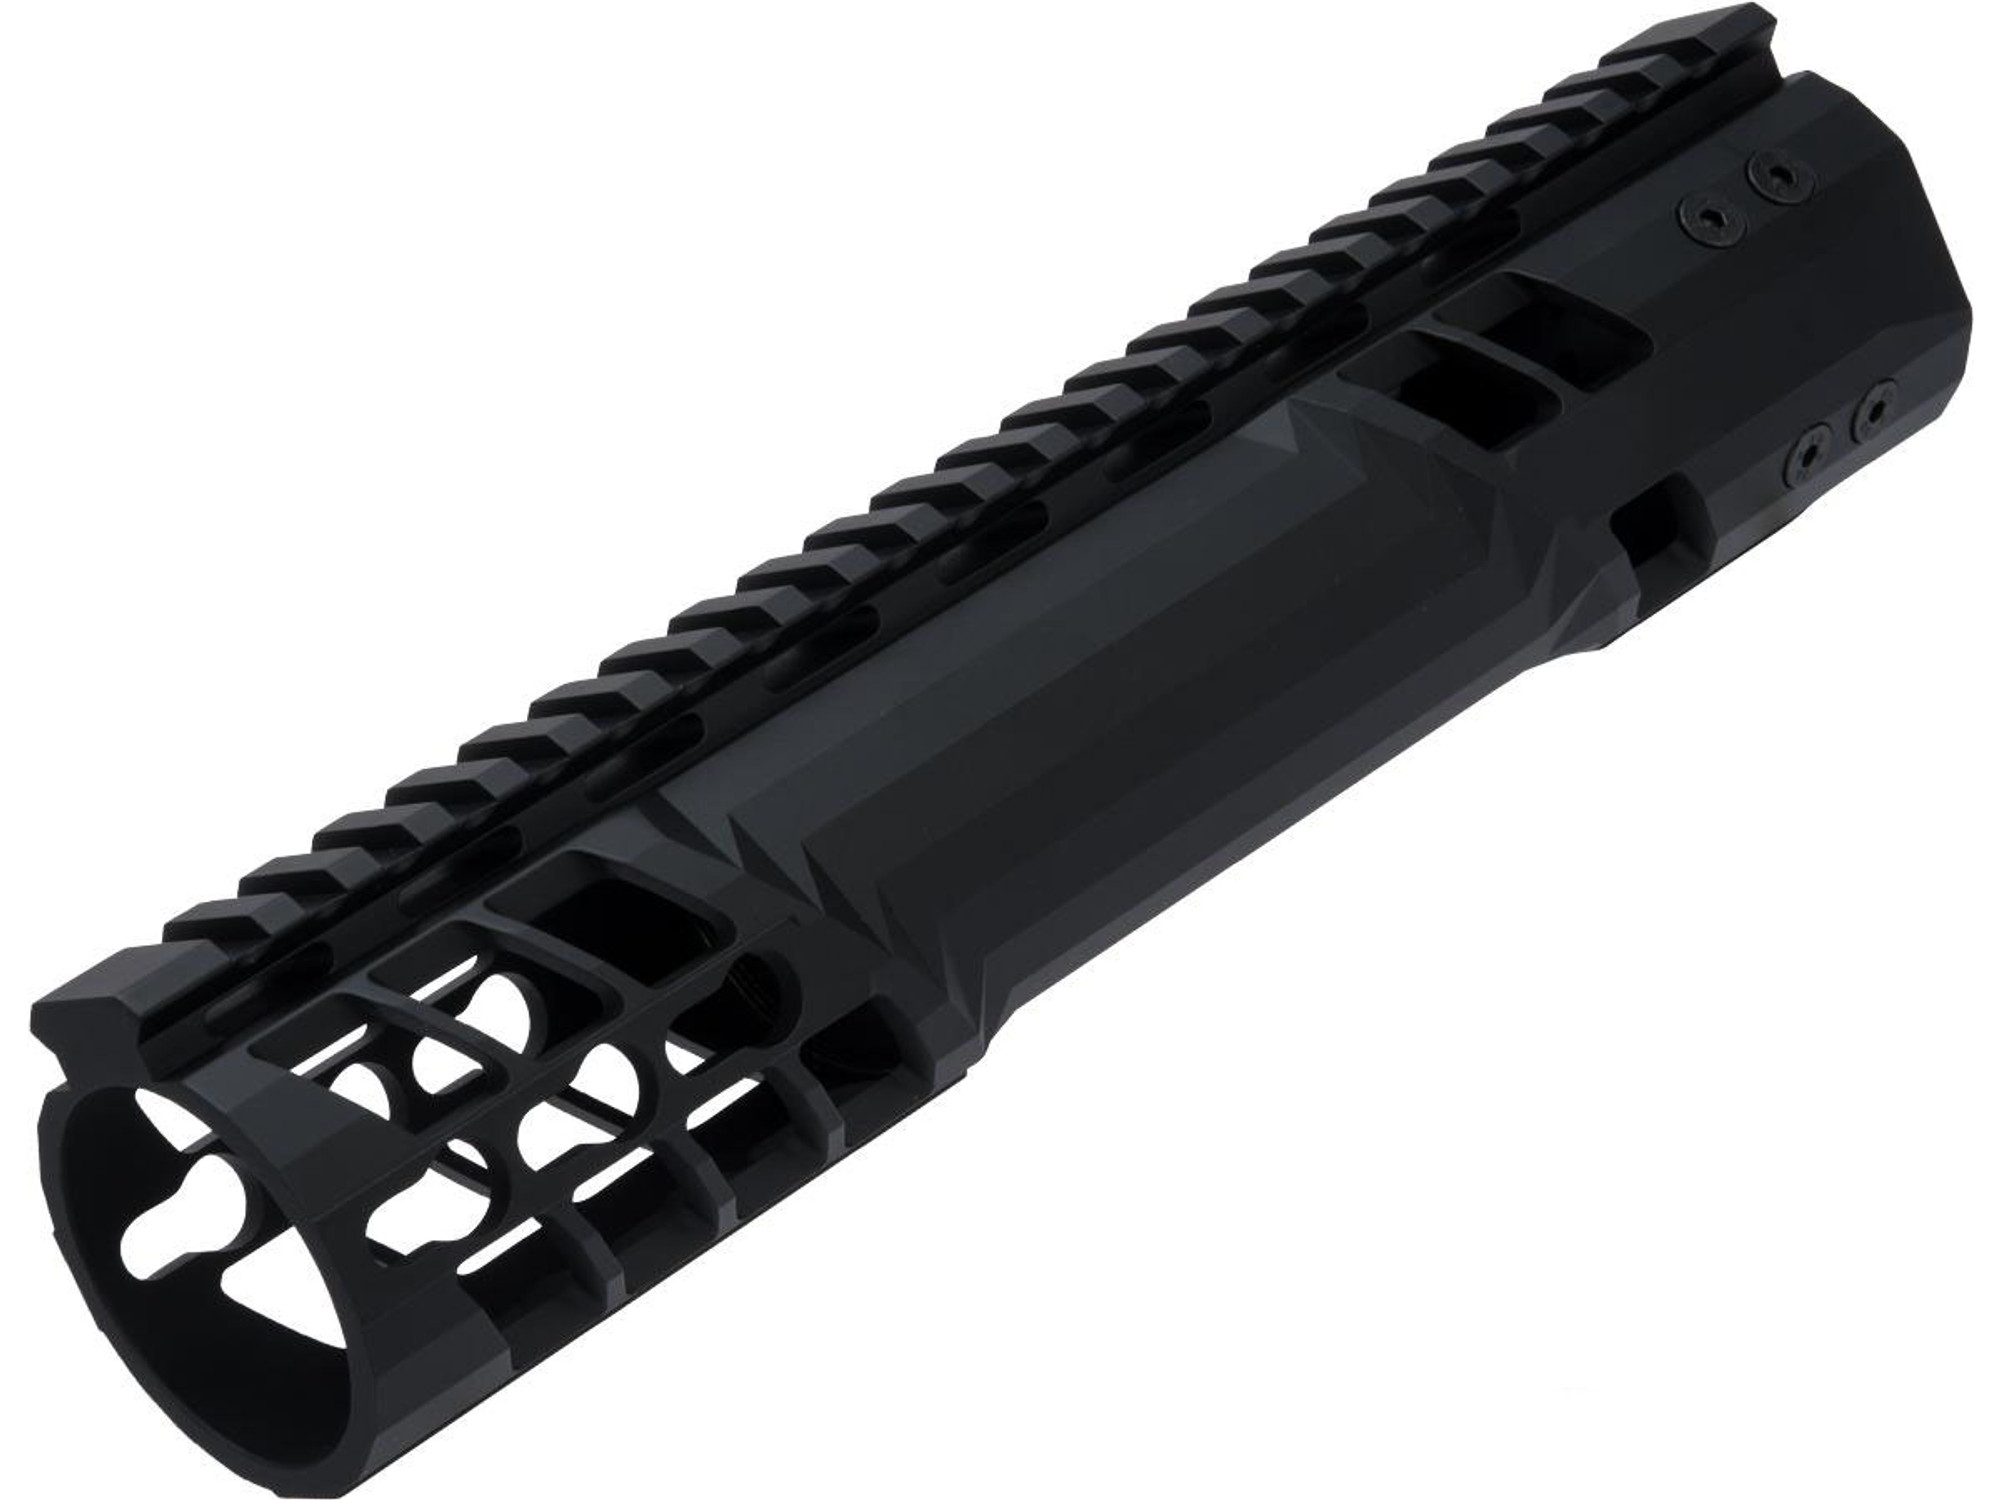 EMG F-1 Firearms Officially Licensed BDR Keymod Handguard for M4/M16 Series Airsoft AEGs (Color: Black / 9.75")